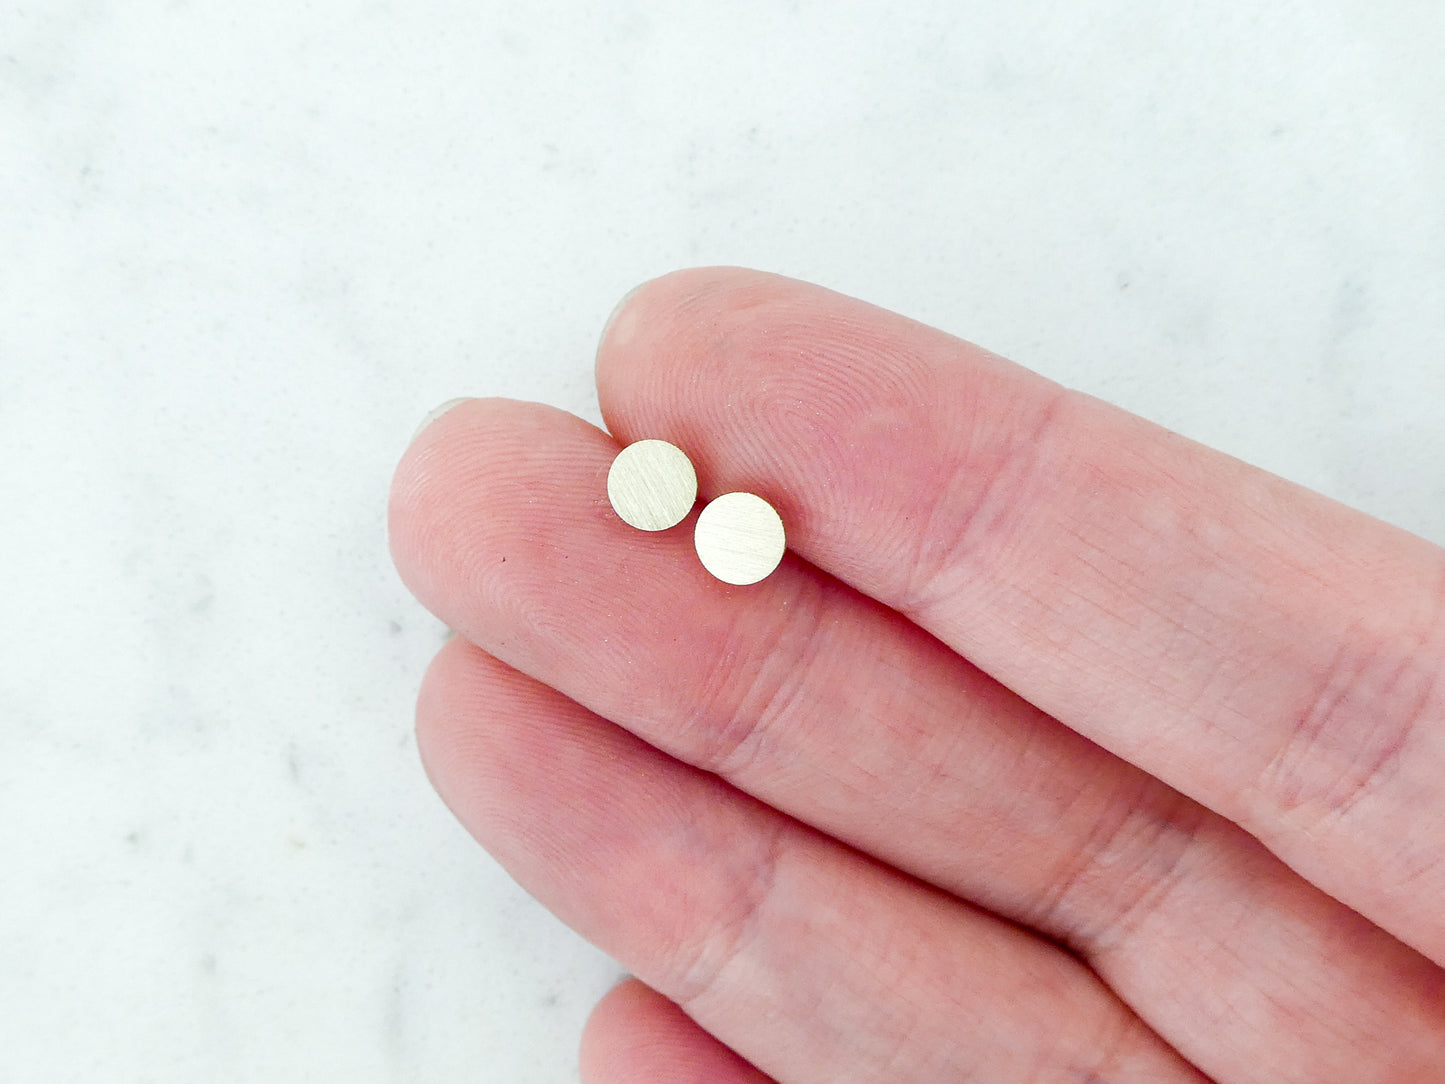 Gold Disk Studs in Solid 14k Gold, 1/4 inch (6mm) round flat earrings in matte 14k yellow, white or rose gold